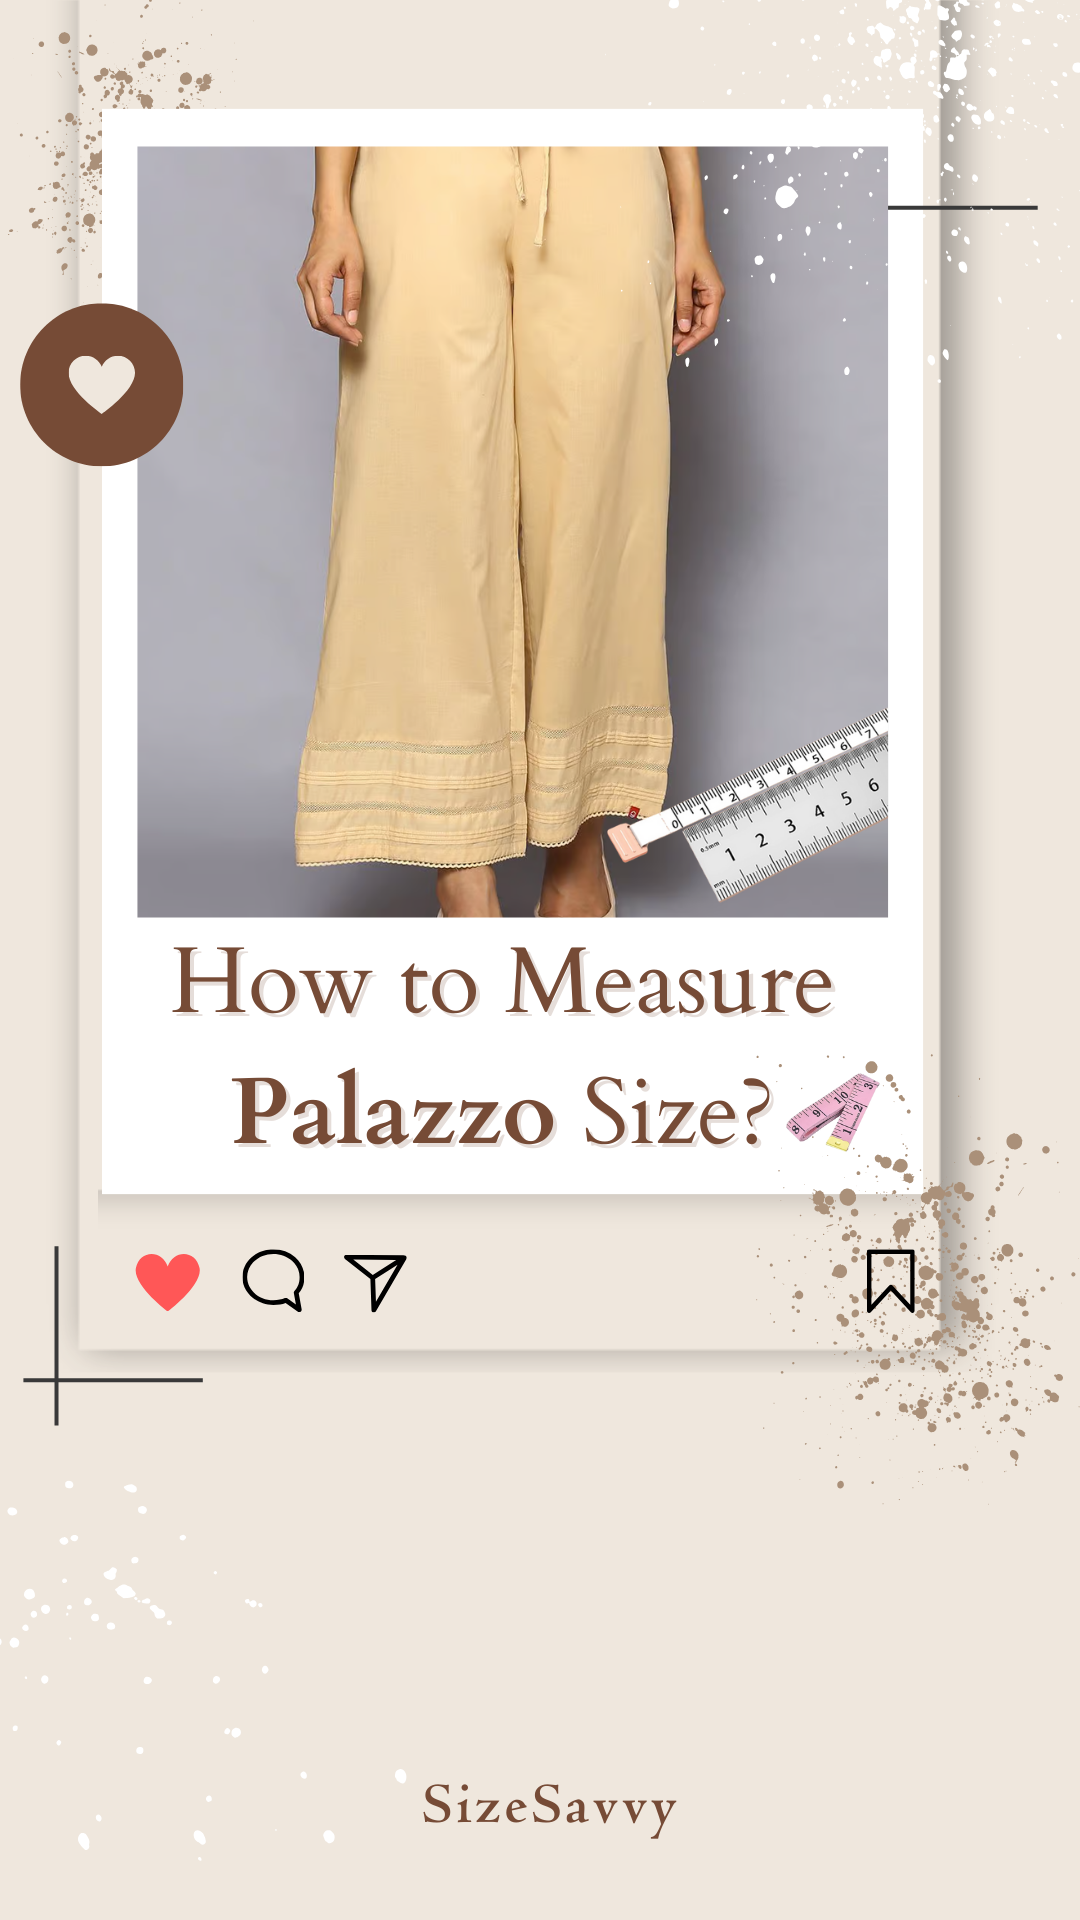 How to Measure Palazzo Size